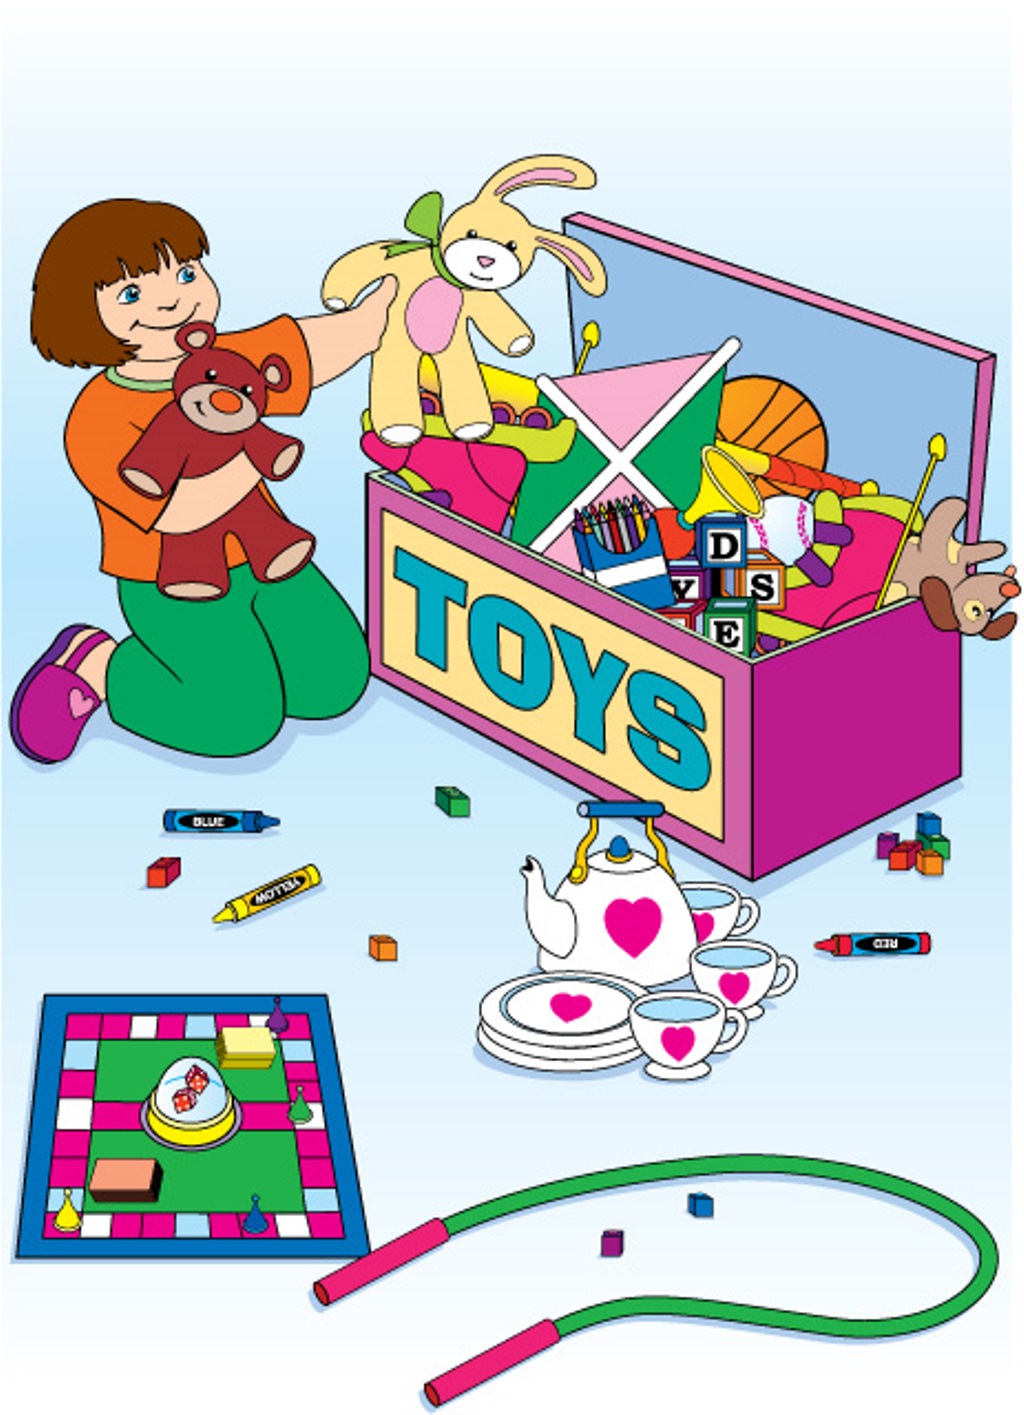 Clean Up Toys Clipart Clipart